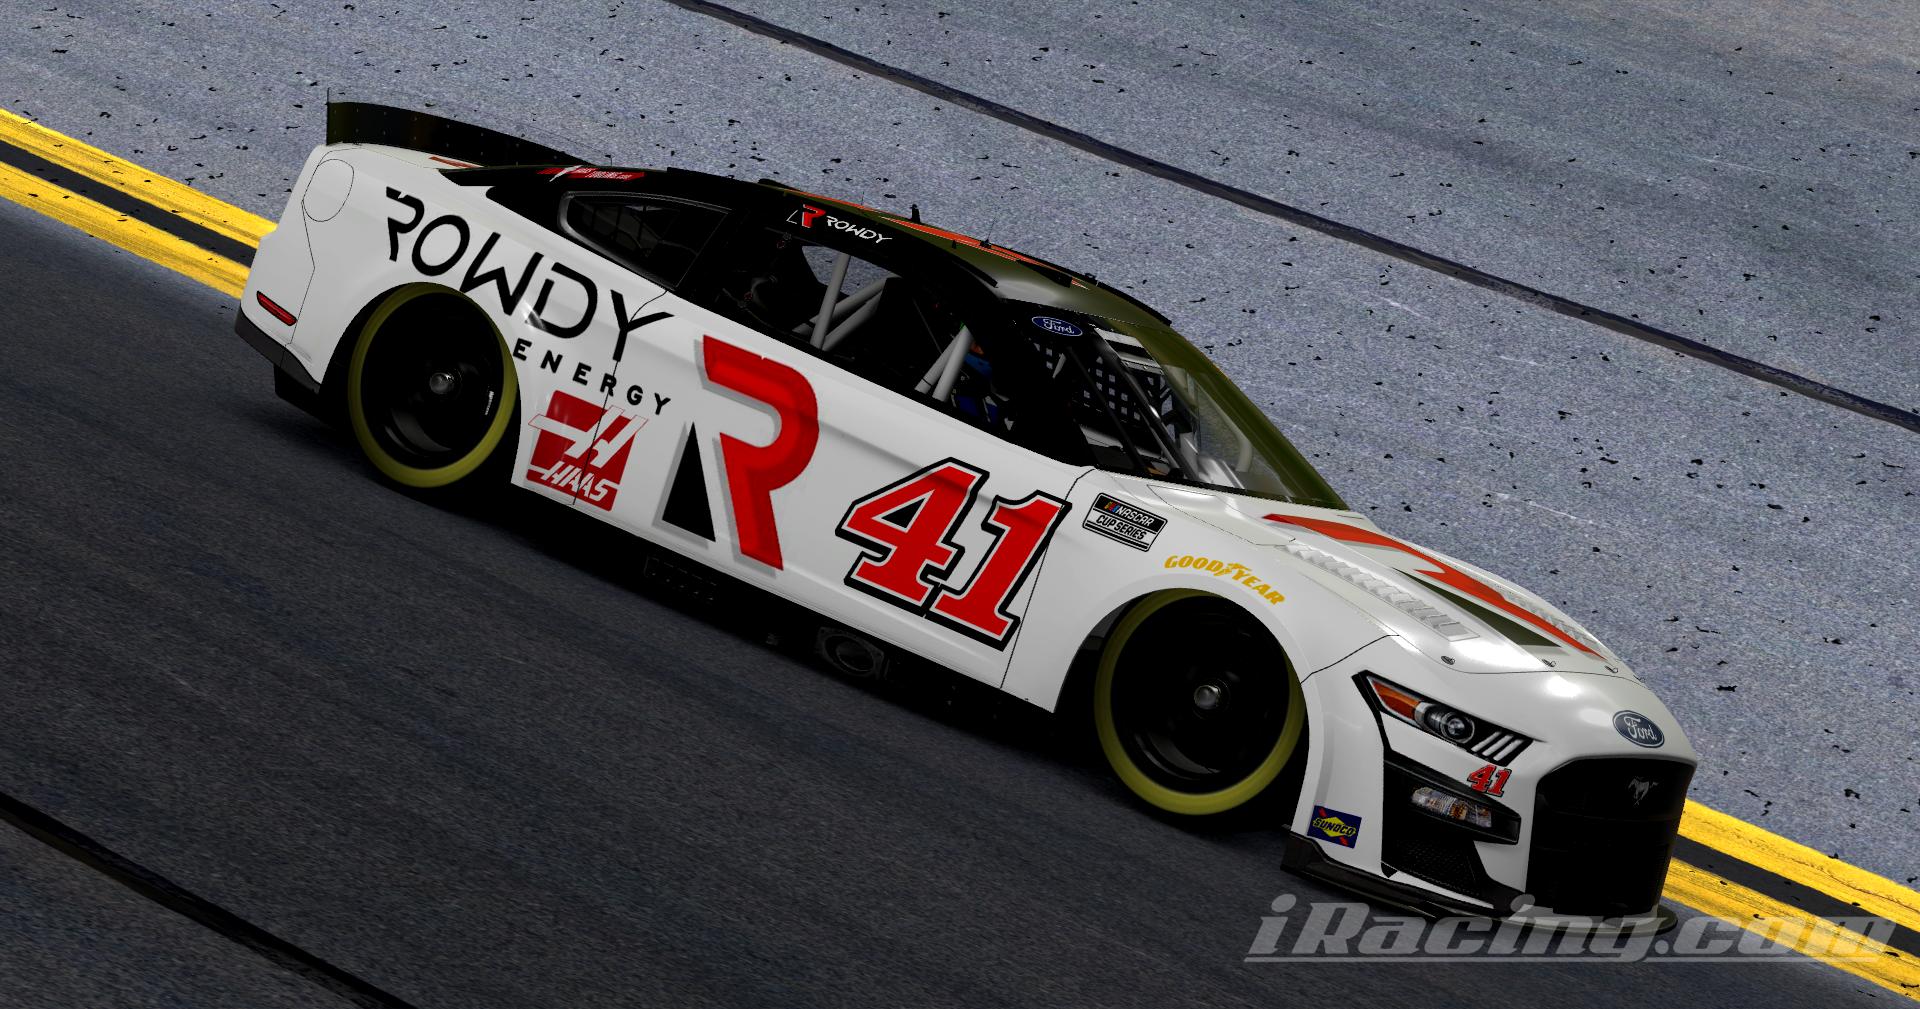 Kyle Busch 2023 Rowdy Energy SHR Concept With Number by Martin Roberg